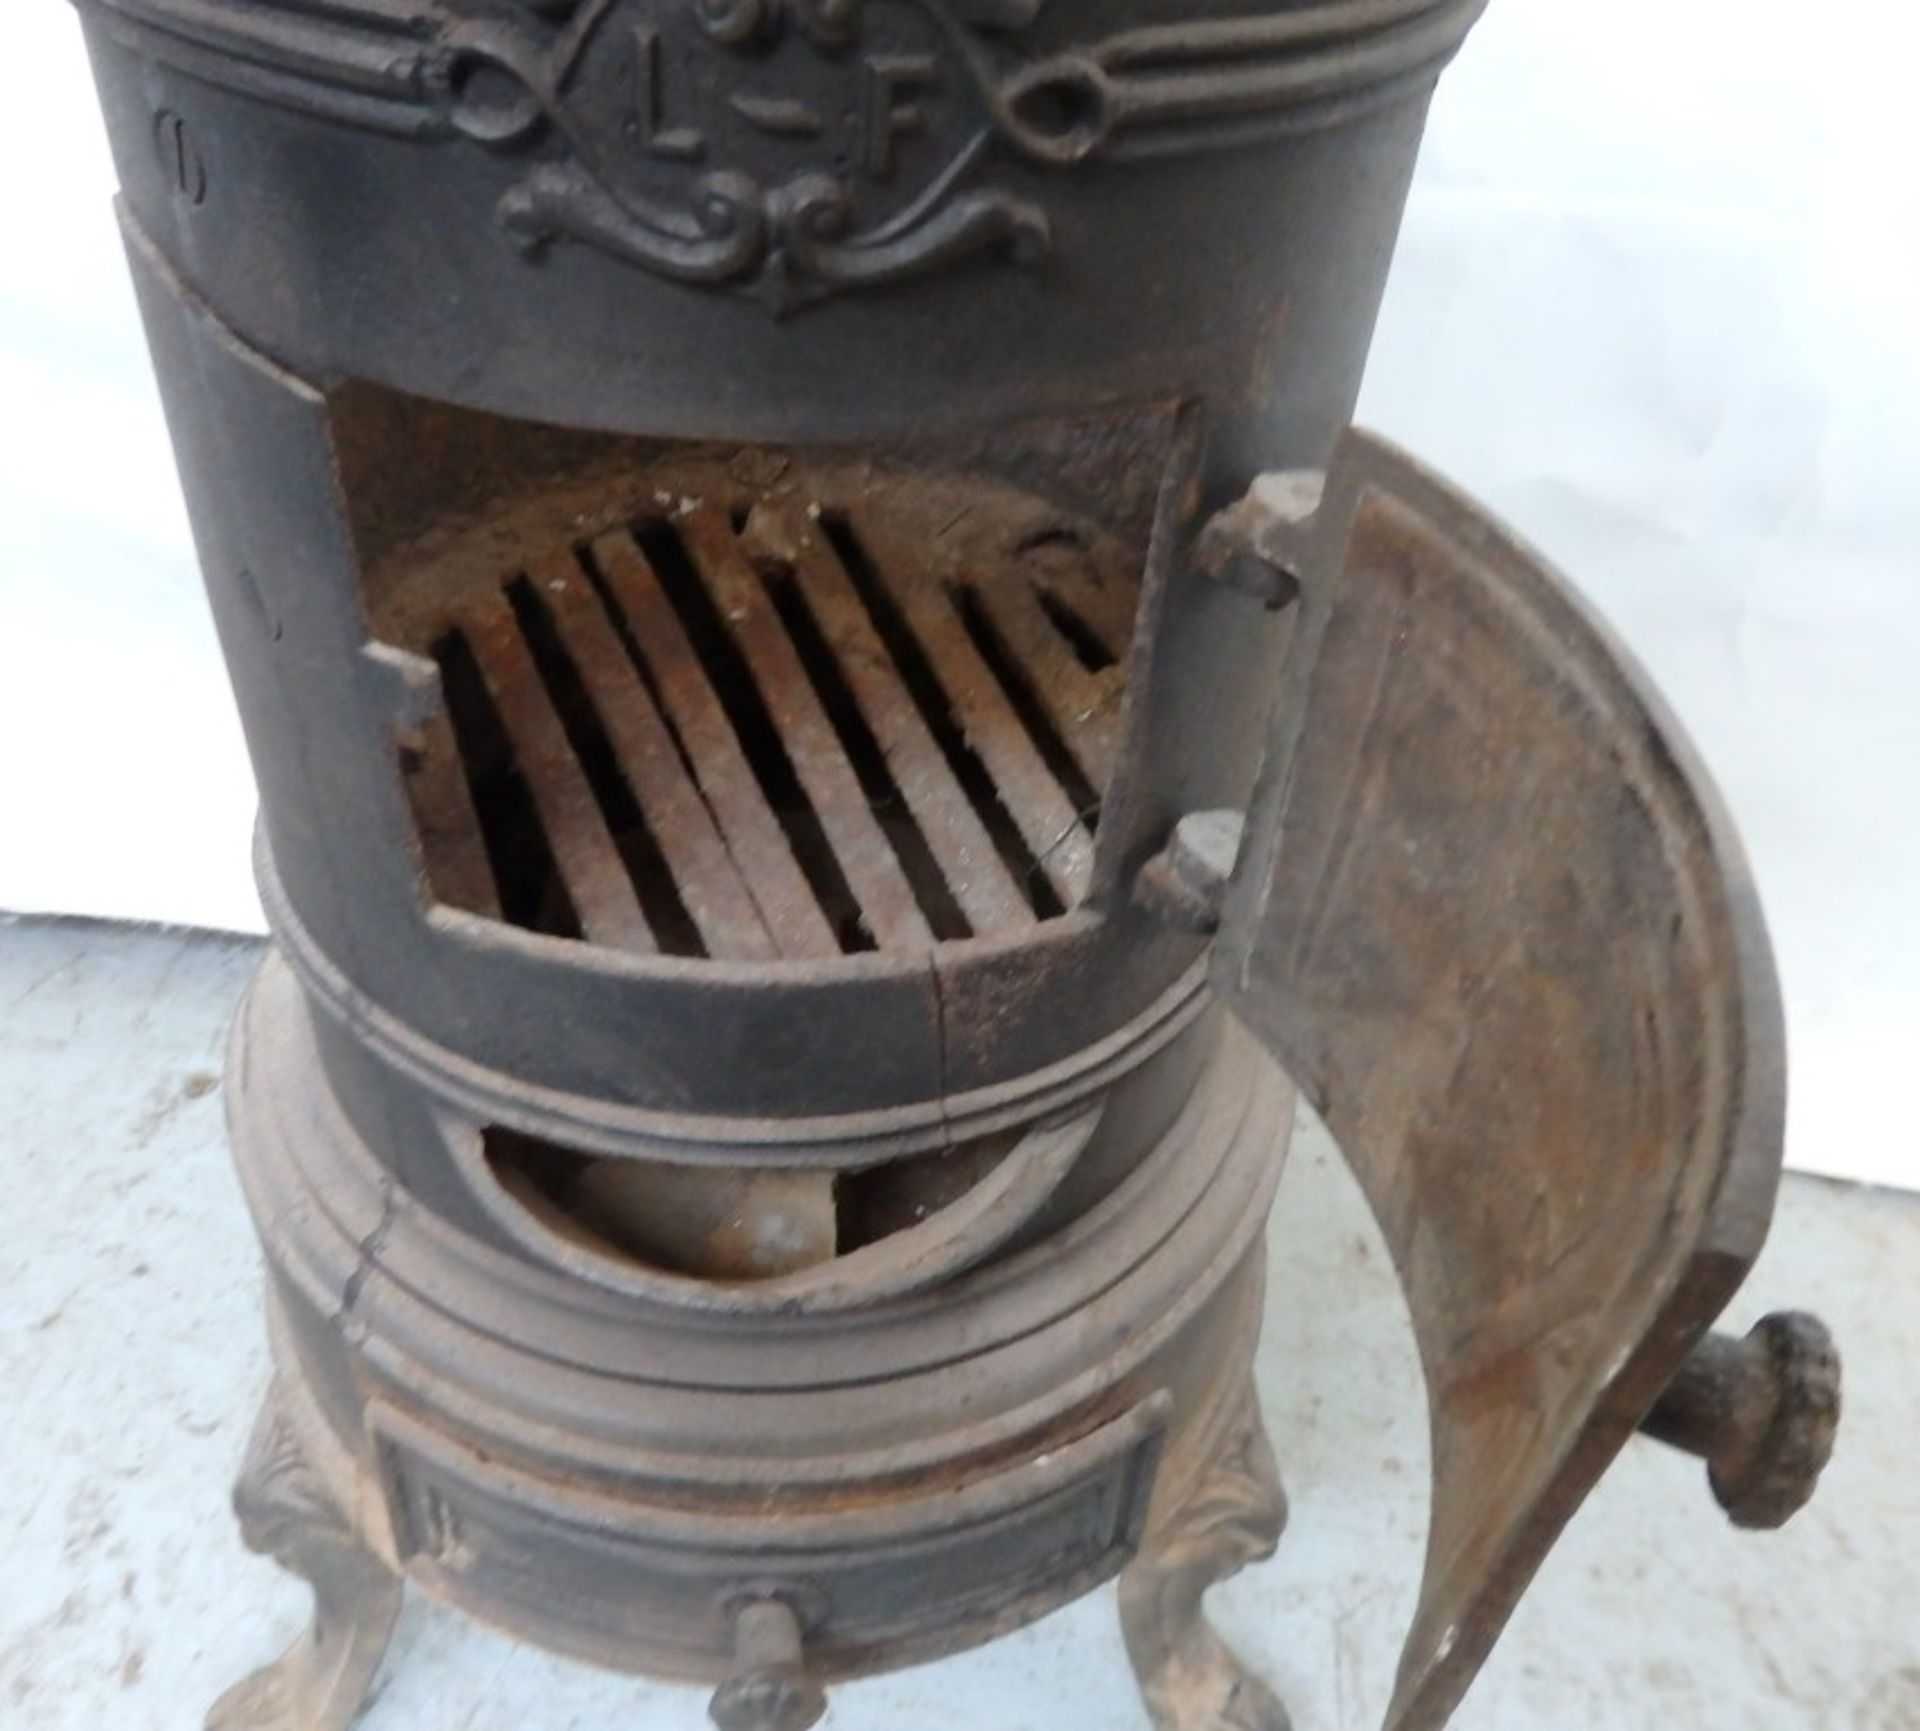 1 x Reclaimed Antique Cast Iron Potbelly Wood Burner / Stove - Dimensions: H61, Diameter 30cm - - Image 17 of 18